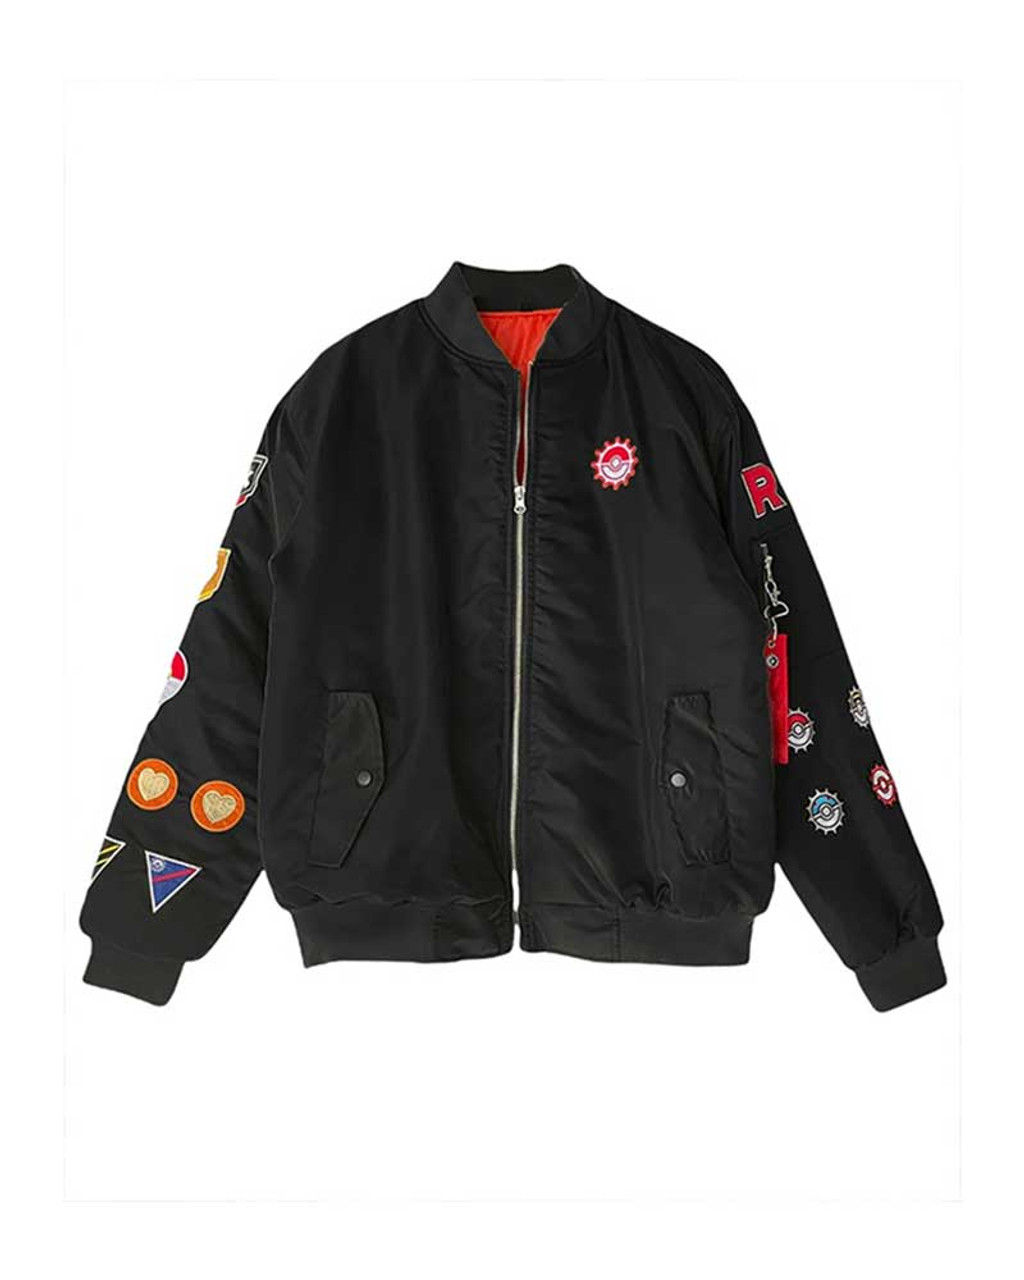 BOMBER JACKET WITH PATCH - Red